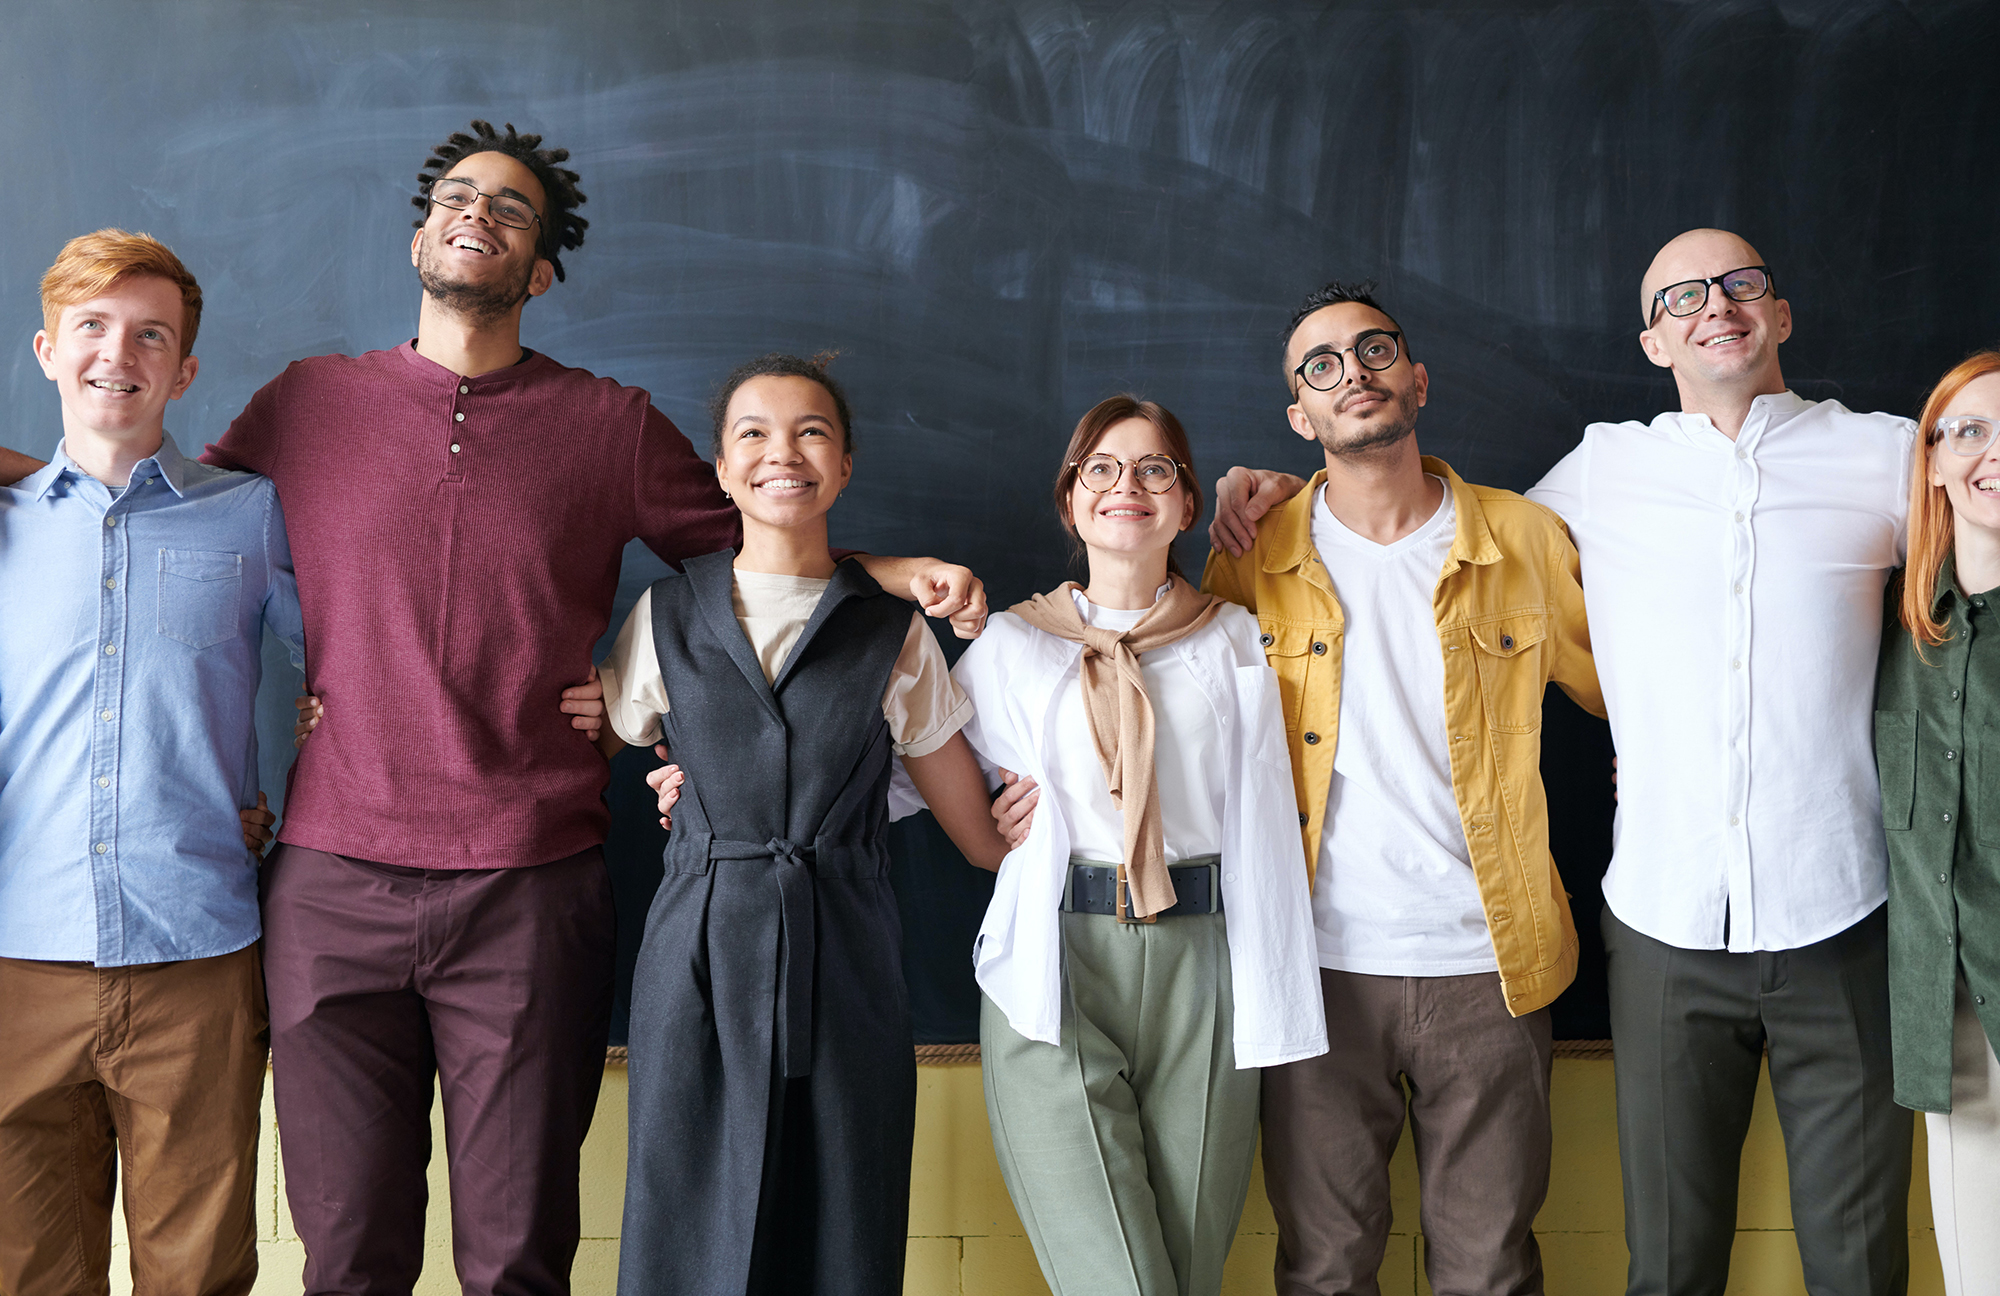 Picture: Happy diverse group smiling in front of a chalkboard